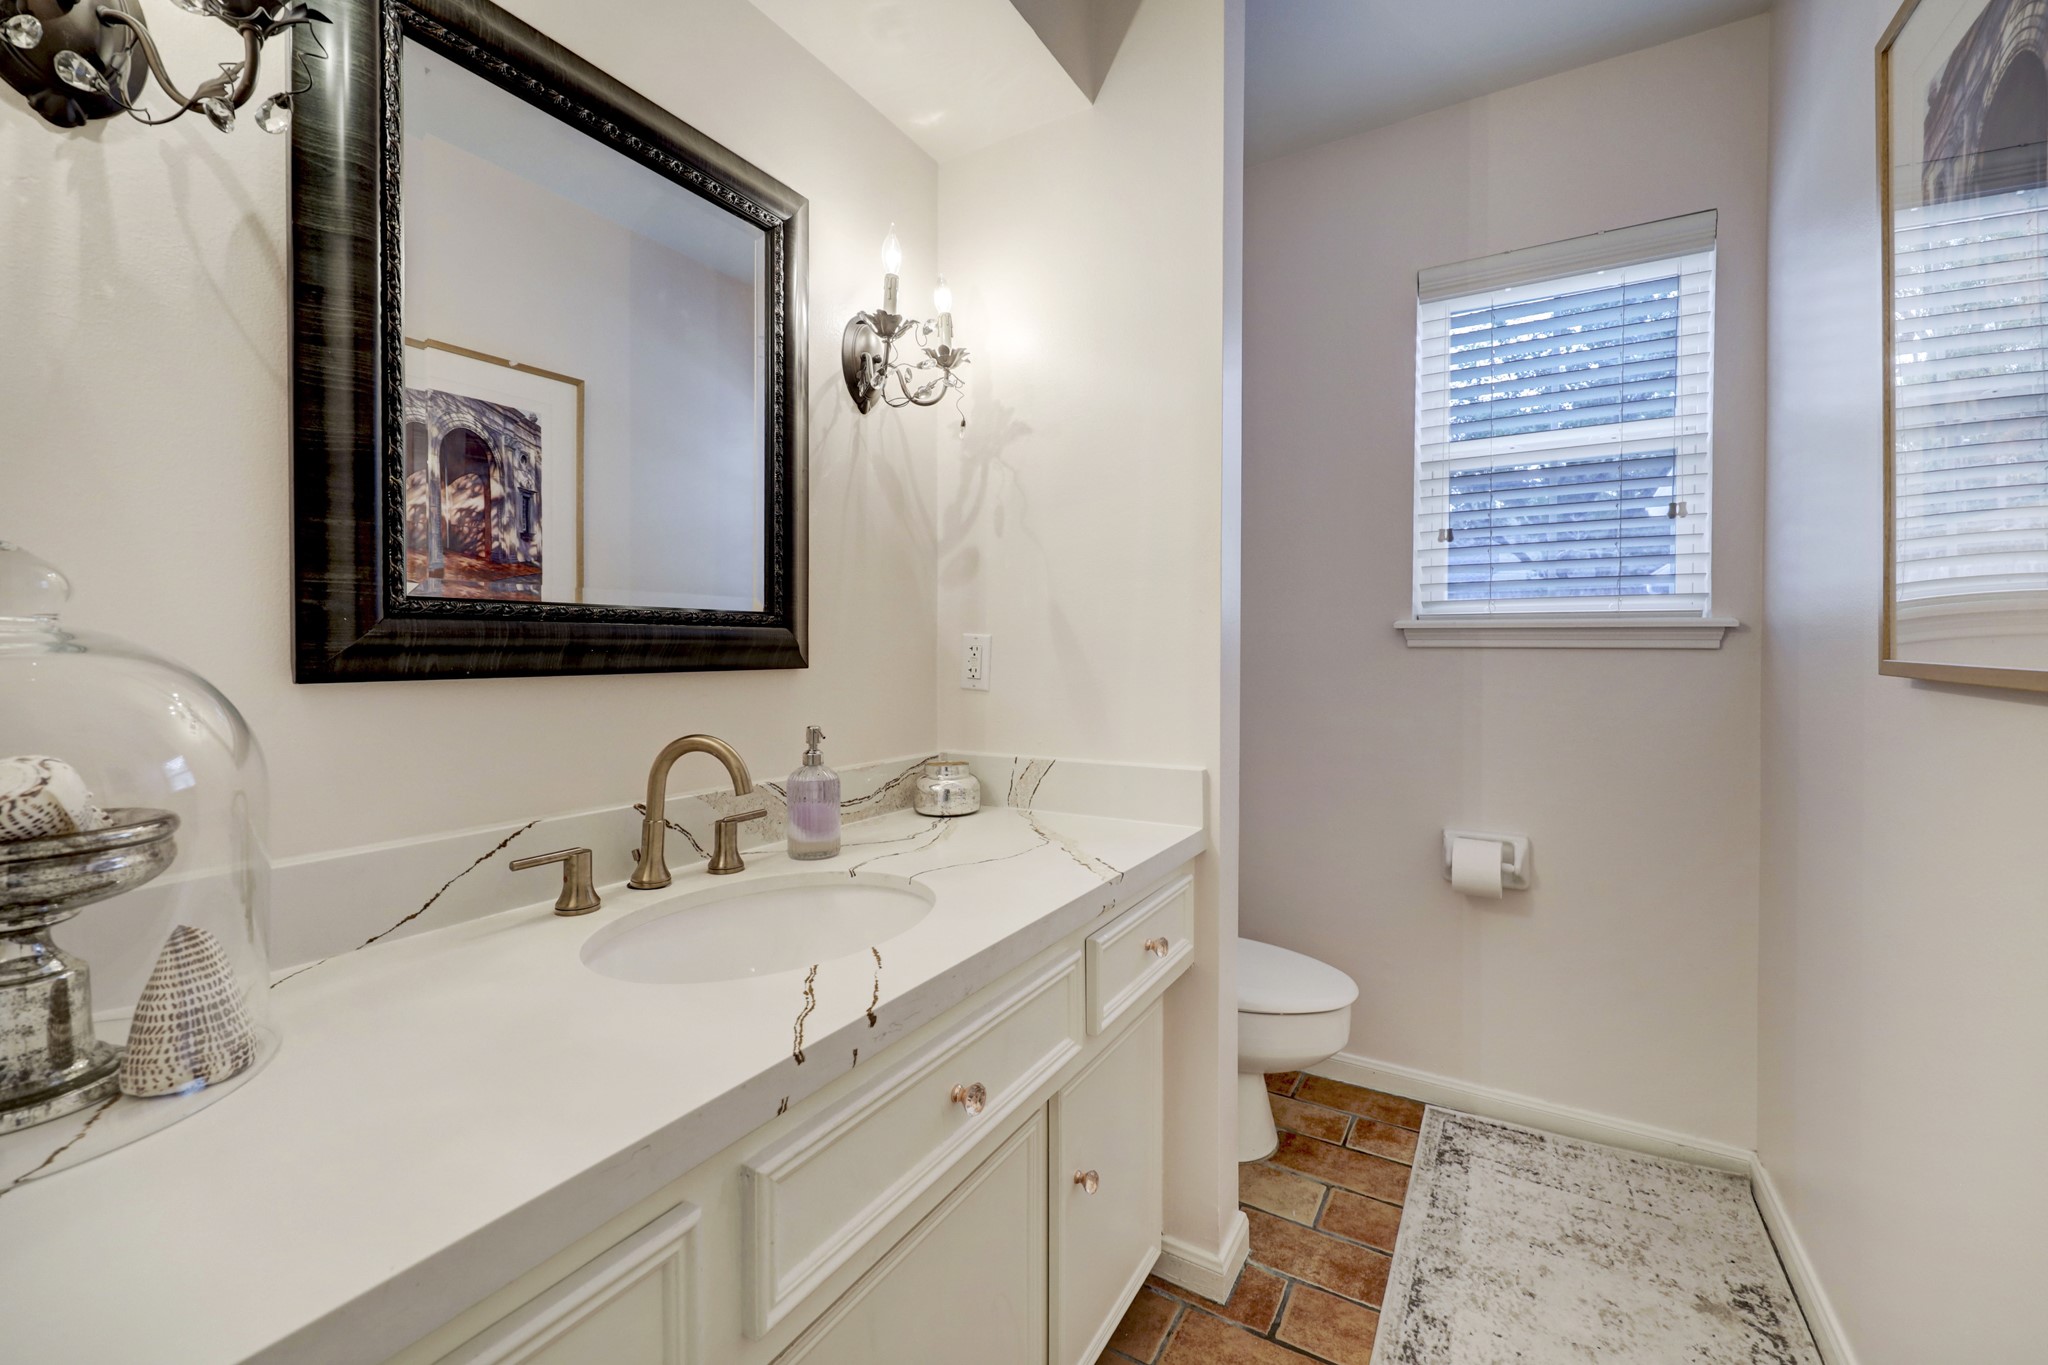 Tastefully updated powder bath is conveniently situated just off the kitchen.